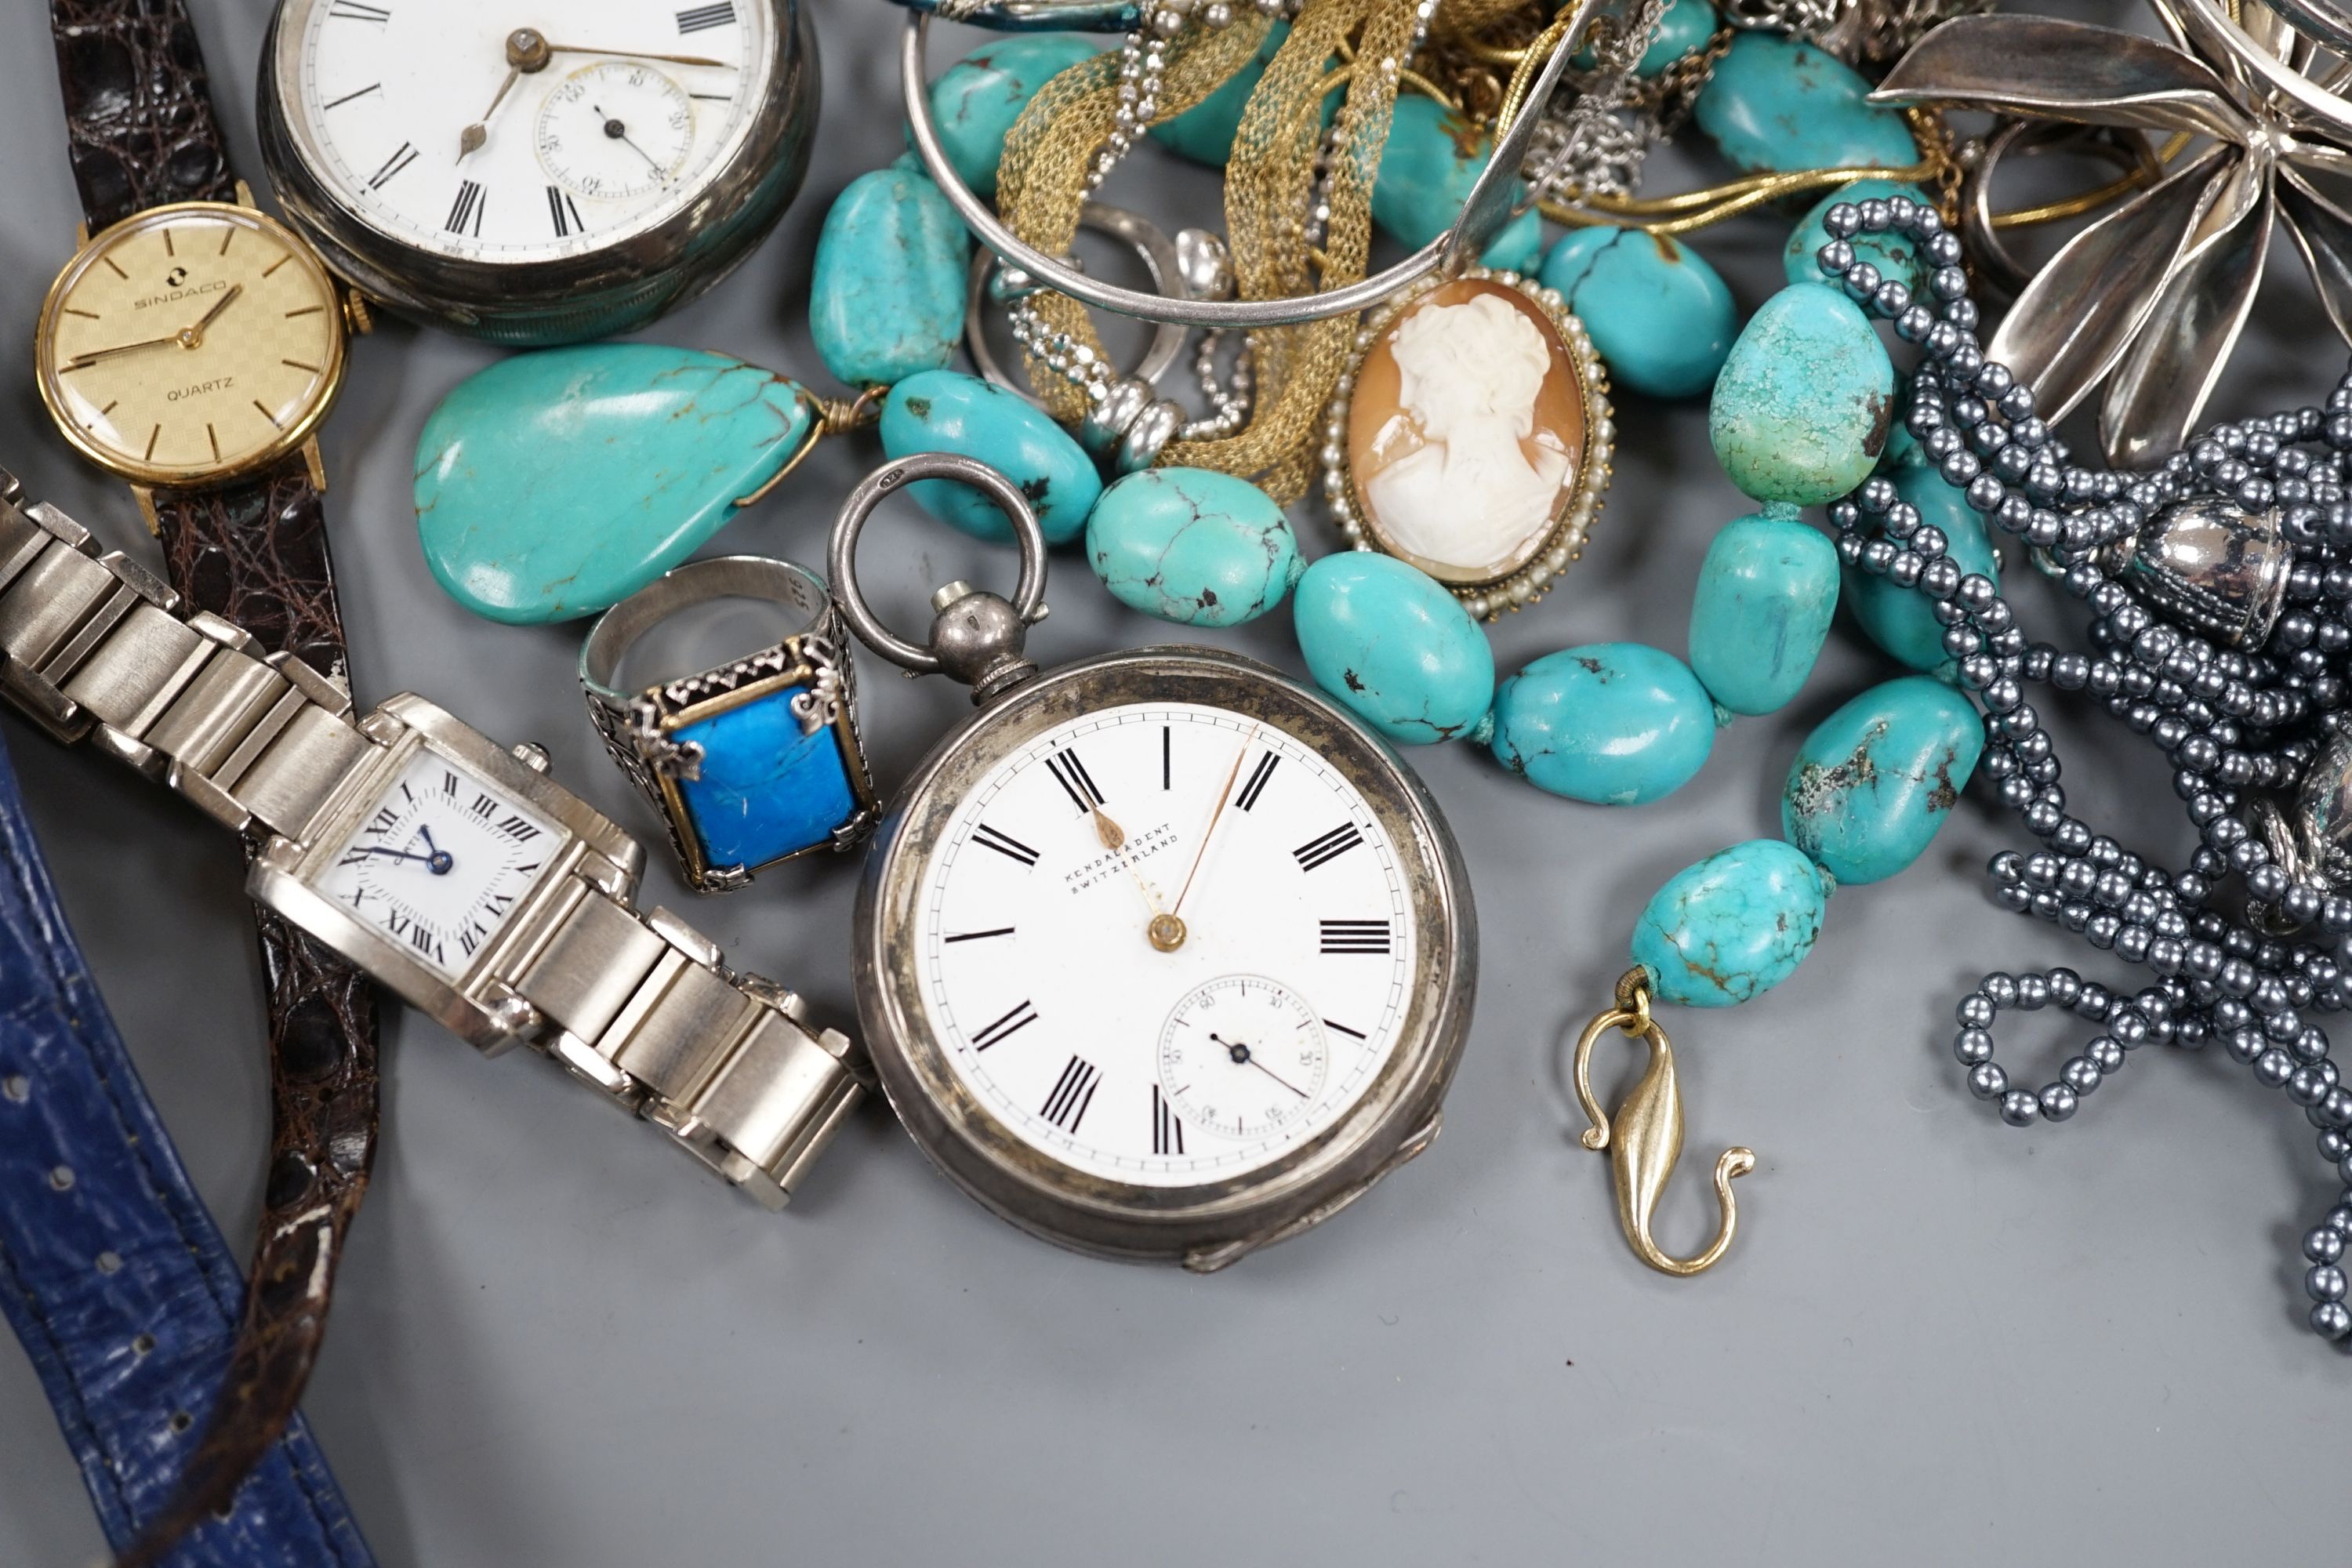 A small quantity of assorted costume jewellery, two silver pocket watches and assorted wrist watches including Timex.